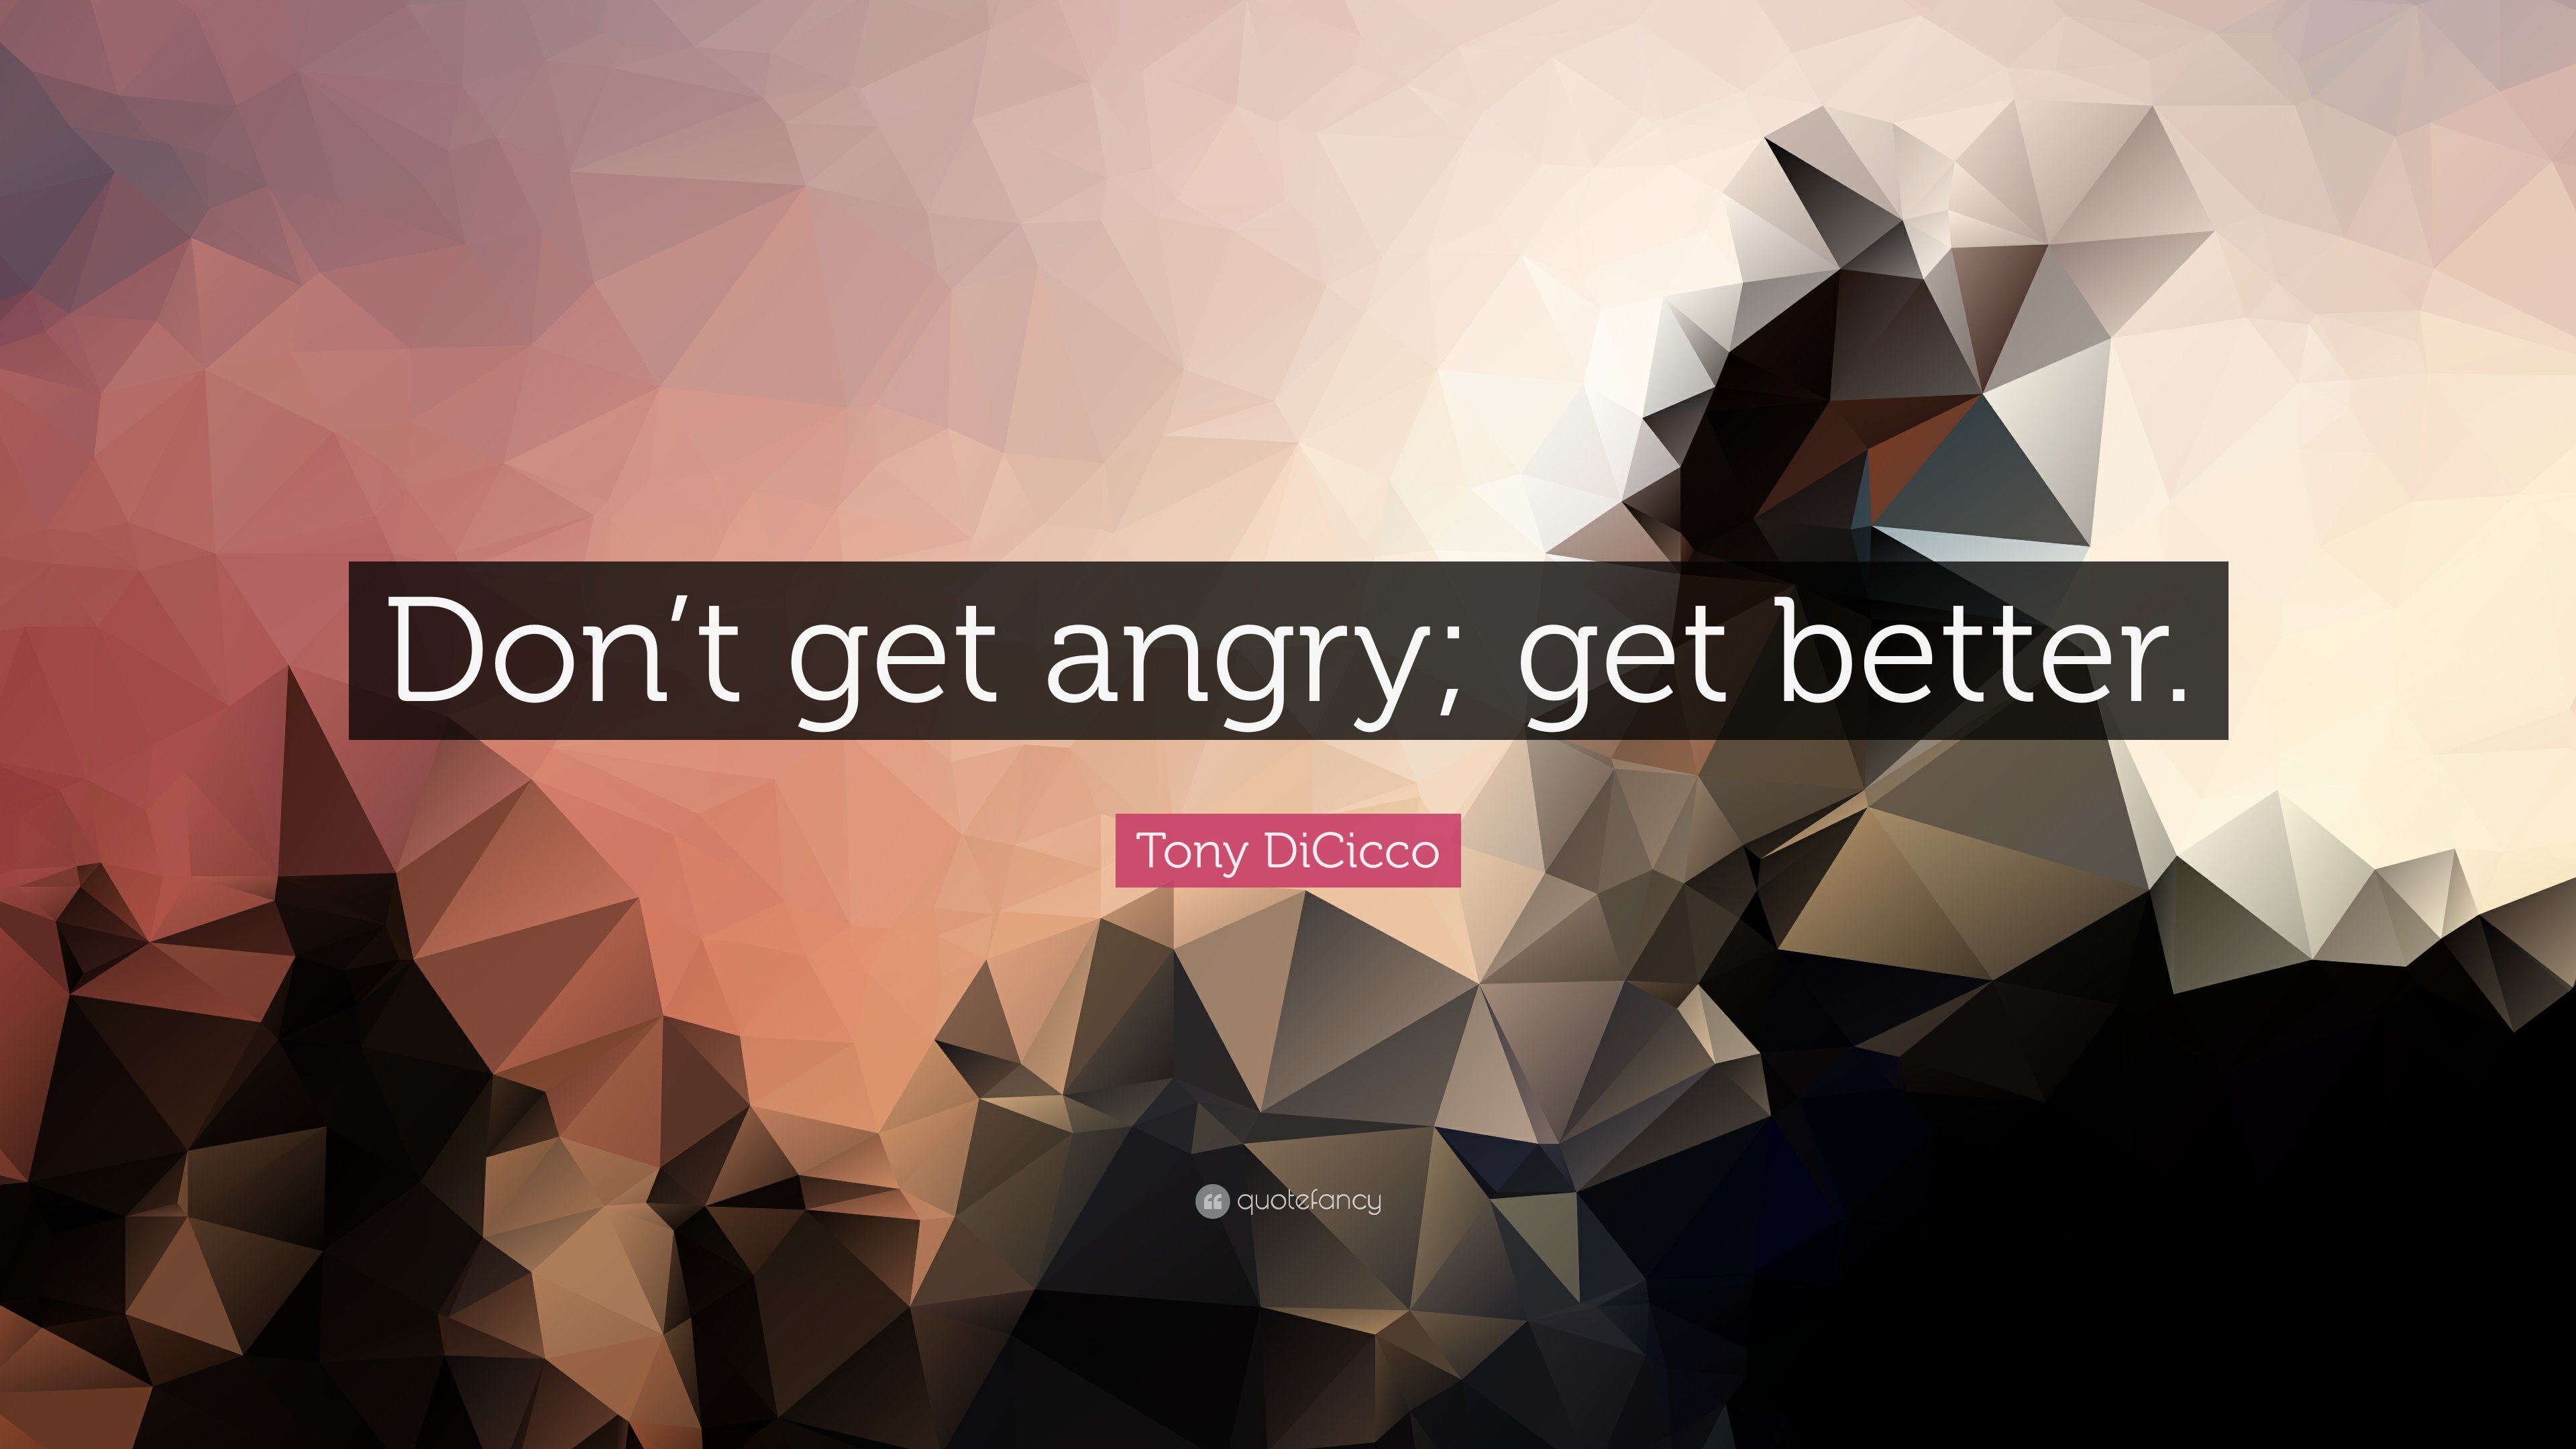 Tony DiCicco Quote: “Don't get angry; get better.”